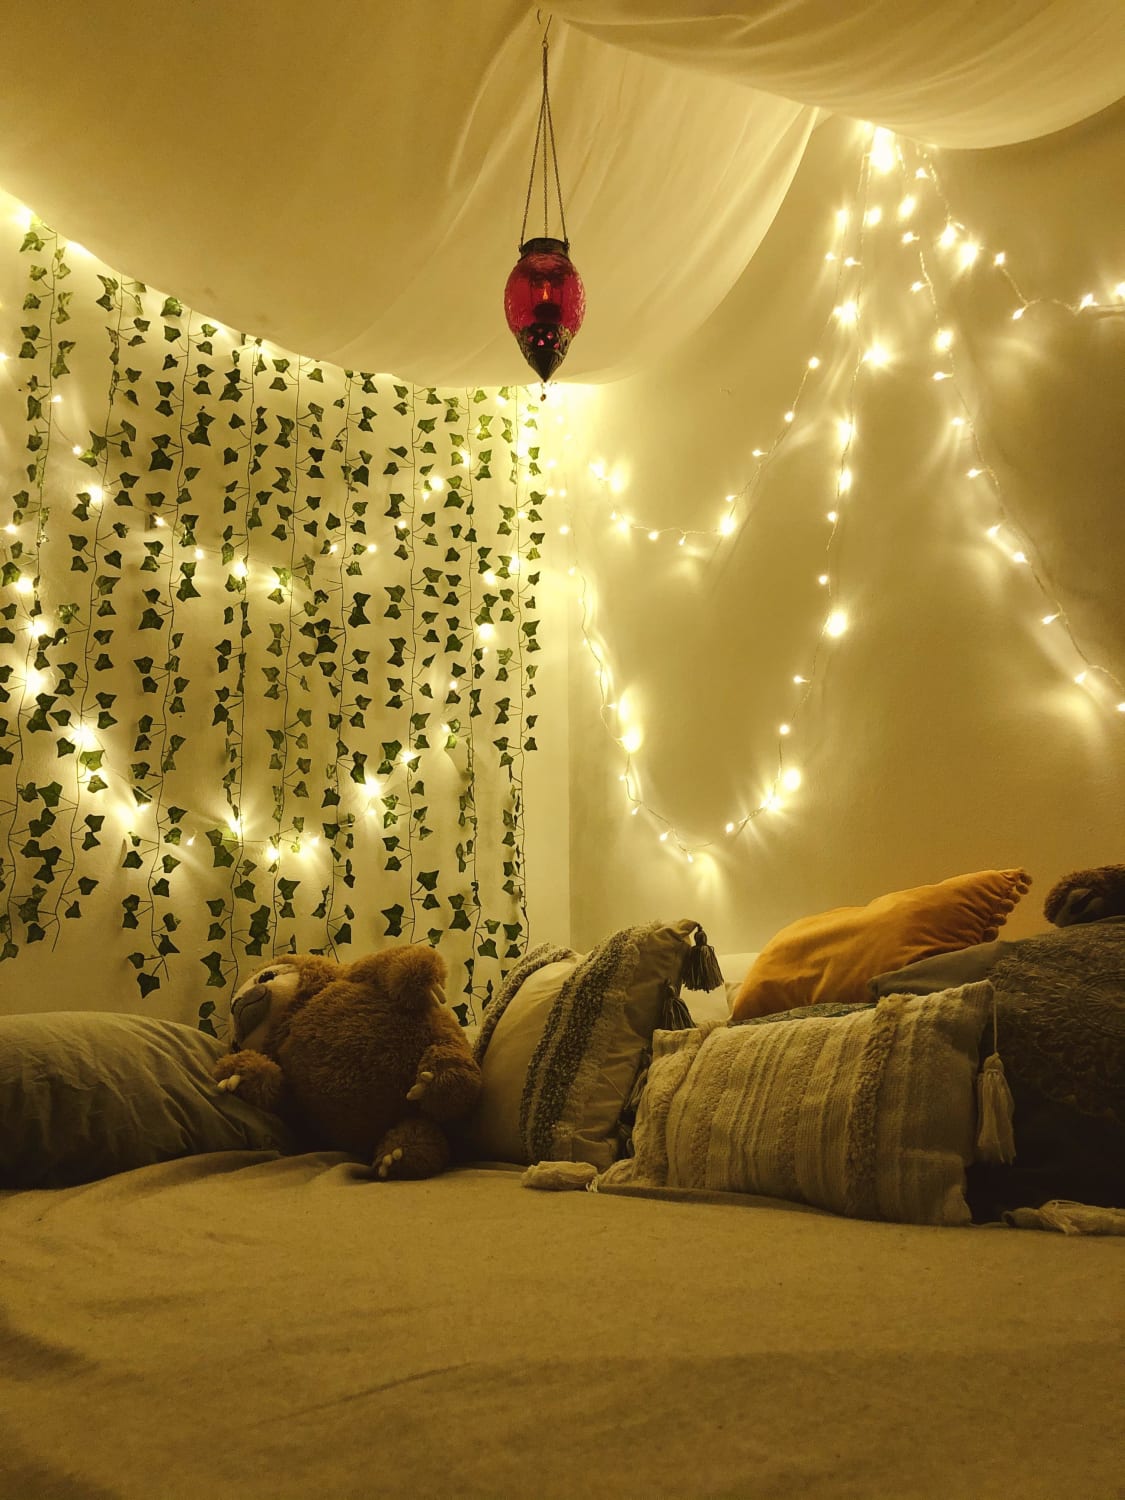 [INT][DIY] My 4 addictions: fairy lights, vines, pillows and sloths 🦥